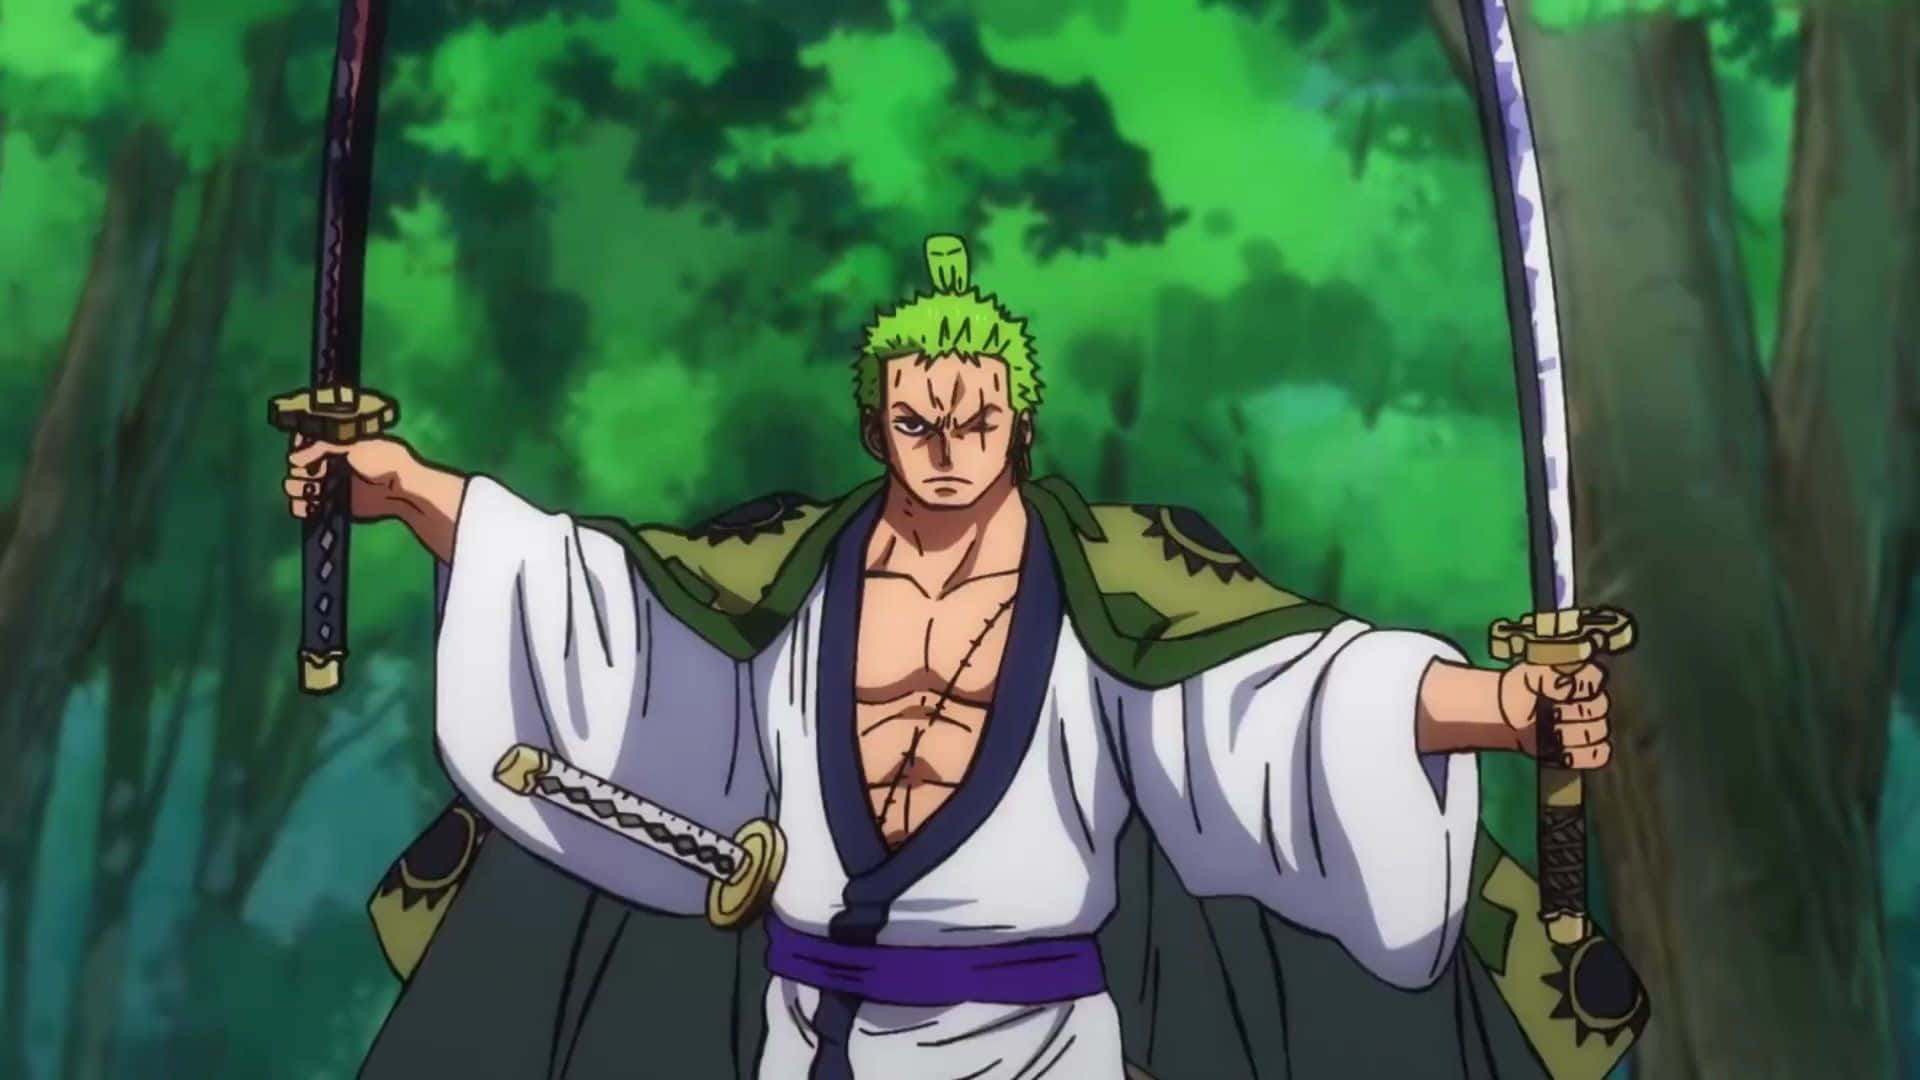 Intense Zoro With Dual Swords Ready for Battle